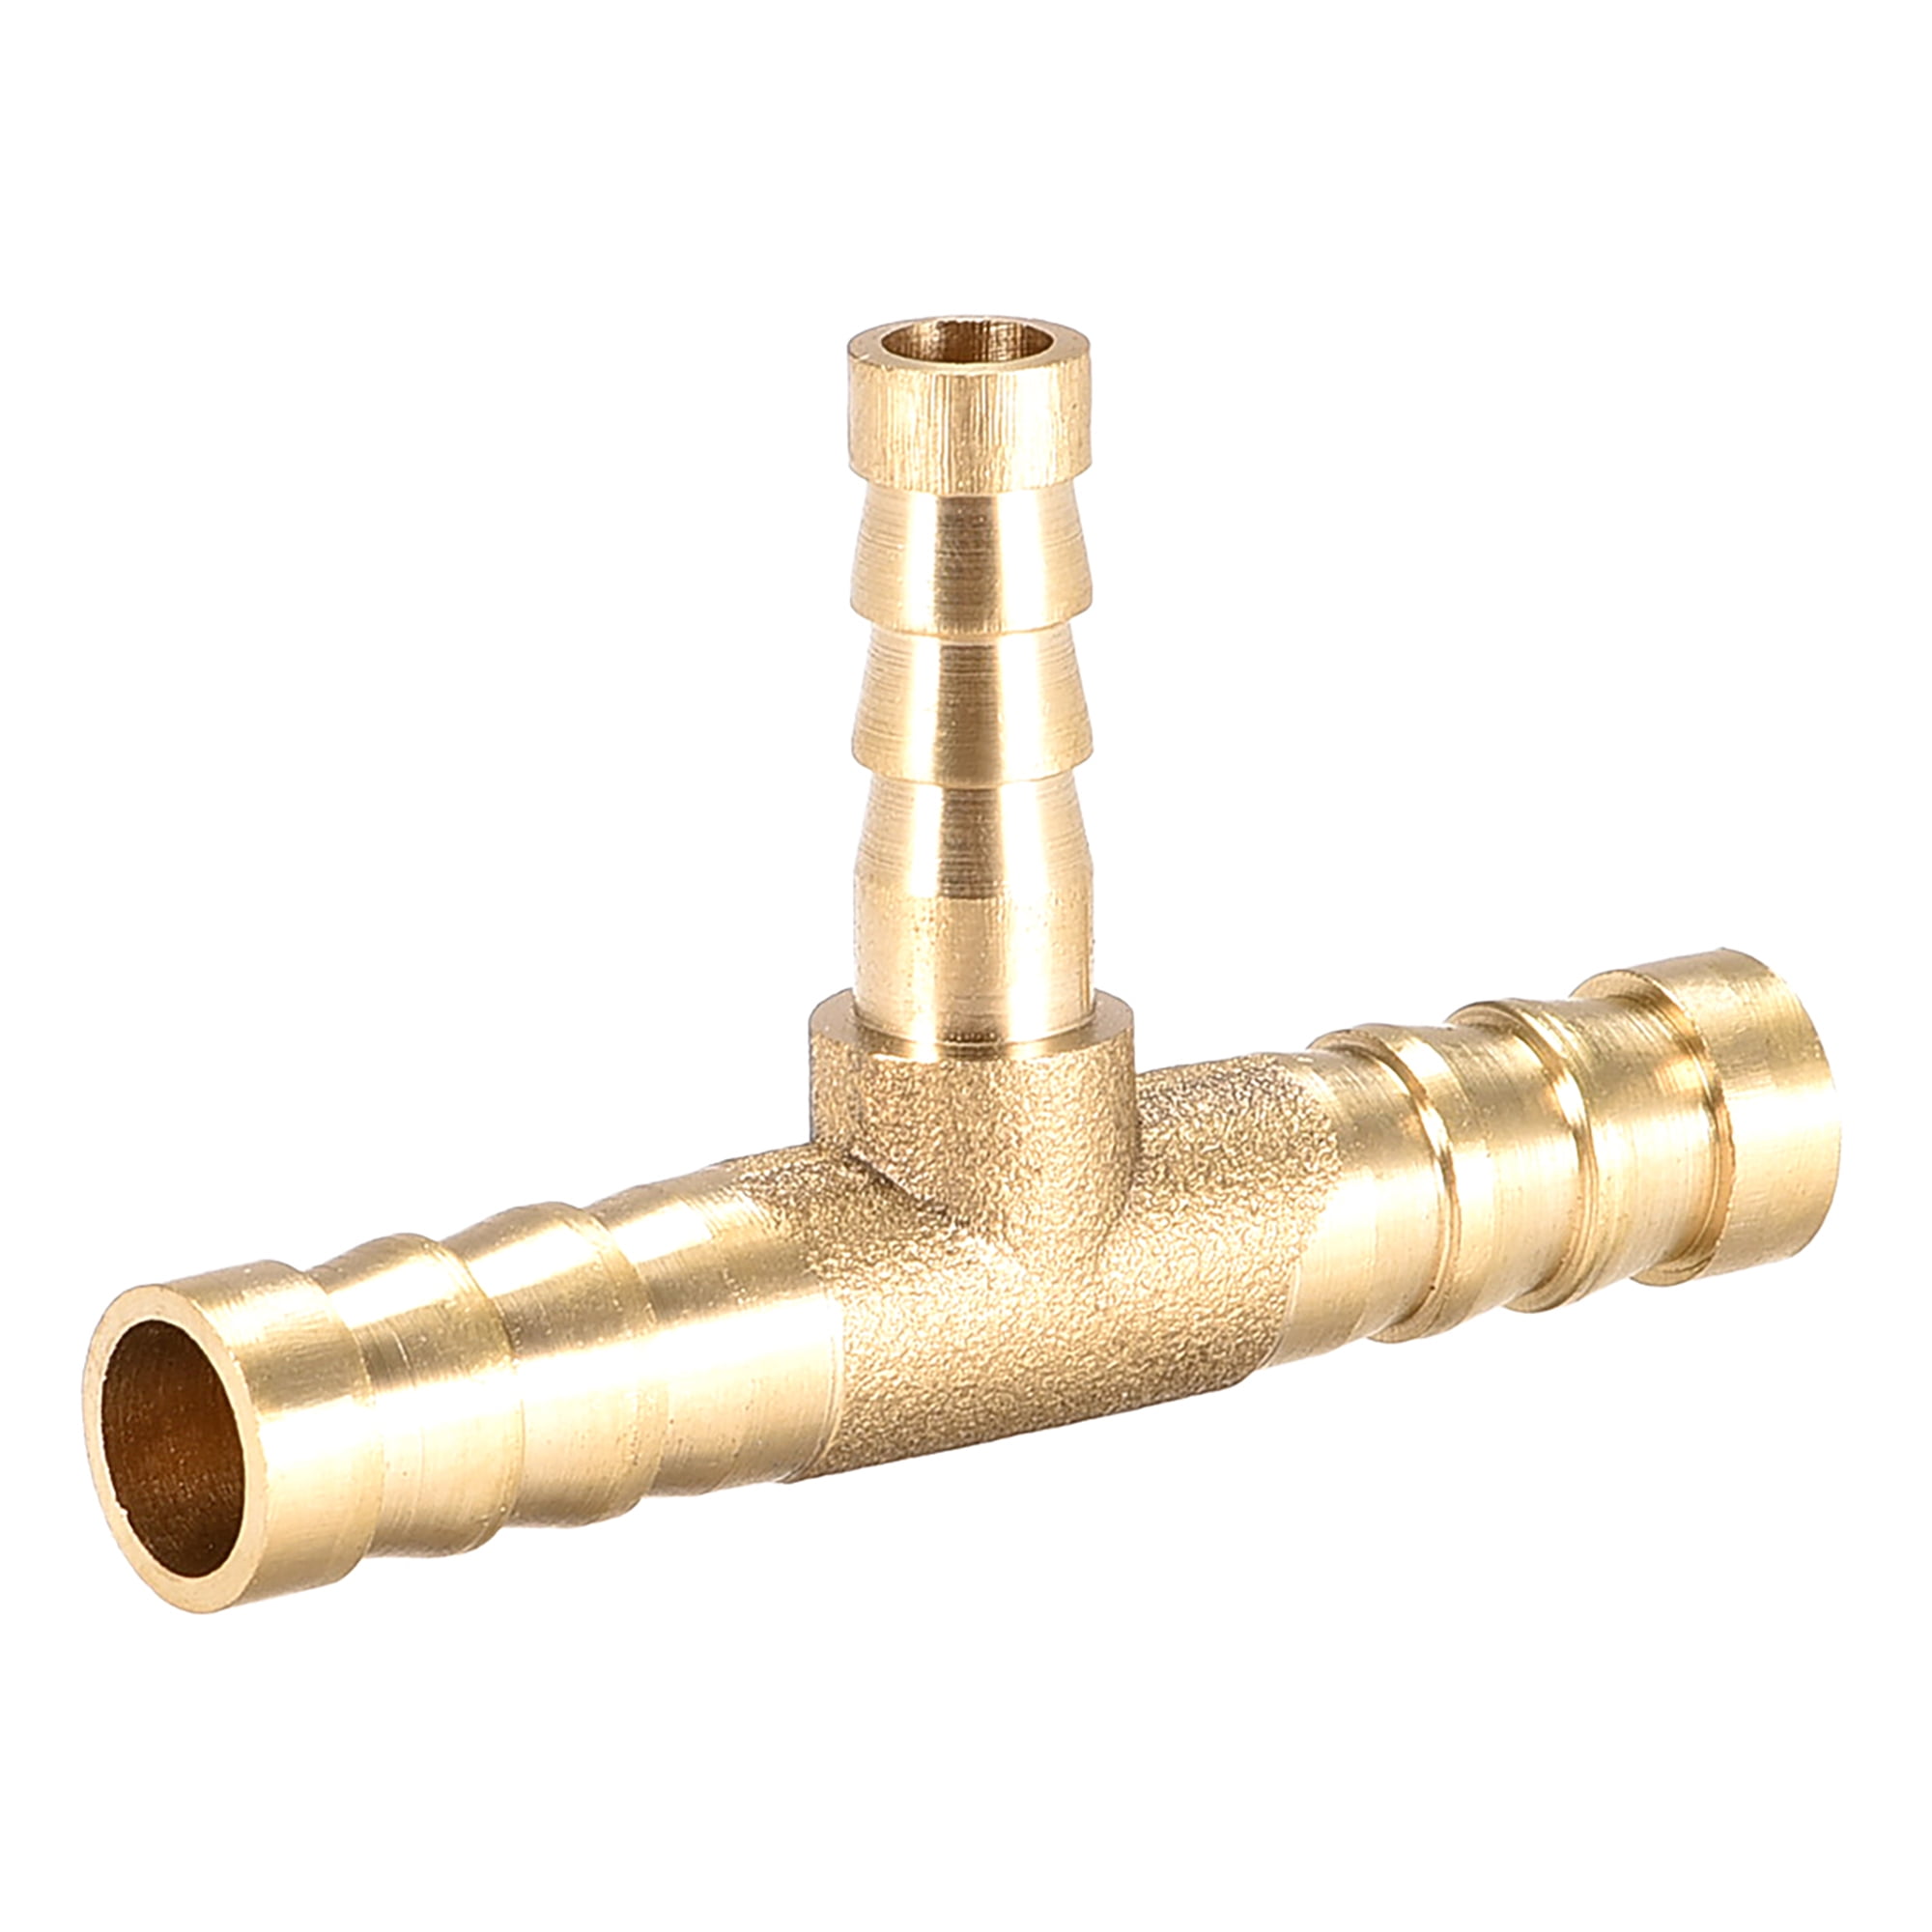 8mm x 6mm x 8mm Brass Hose Reducer Barb Fitting Tee T-Shaped 3 Way ...